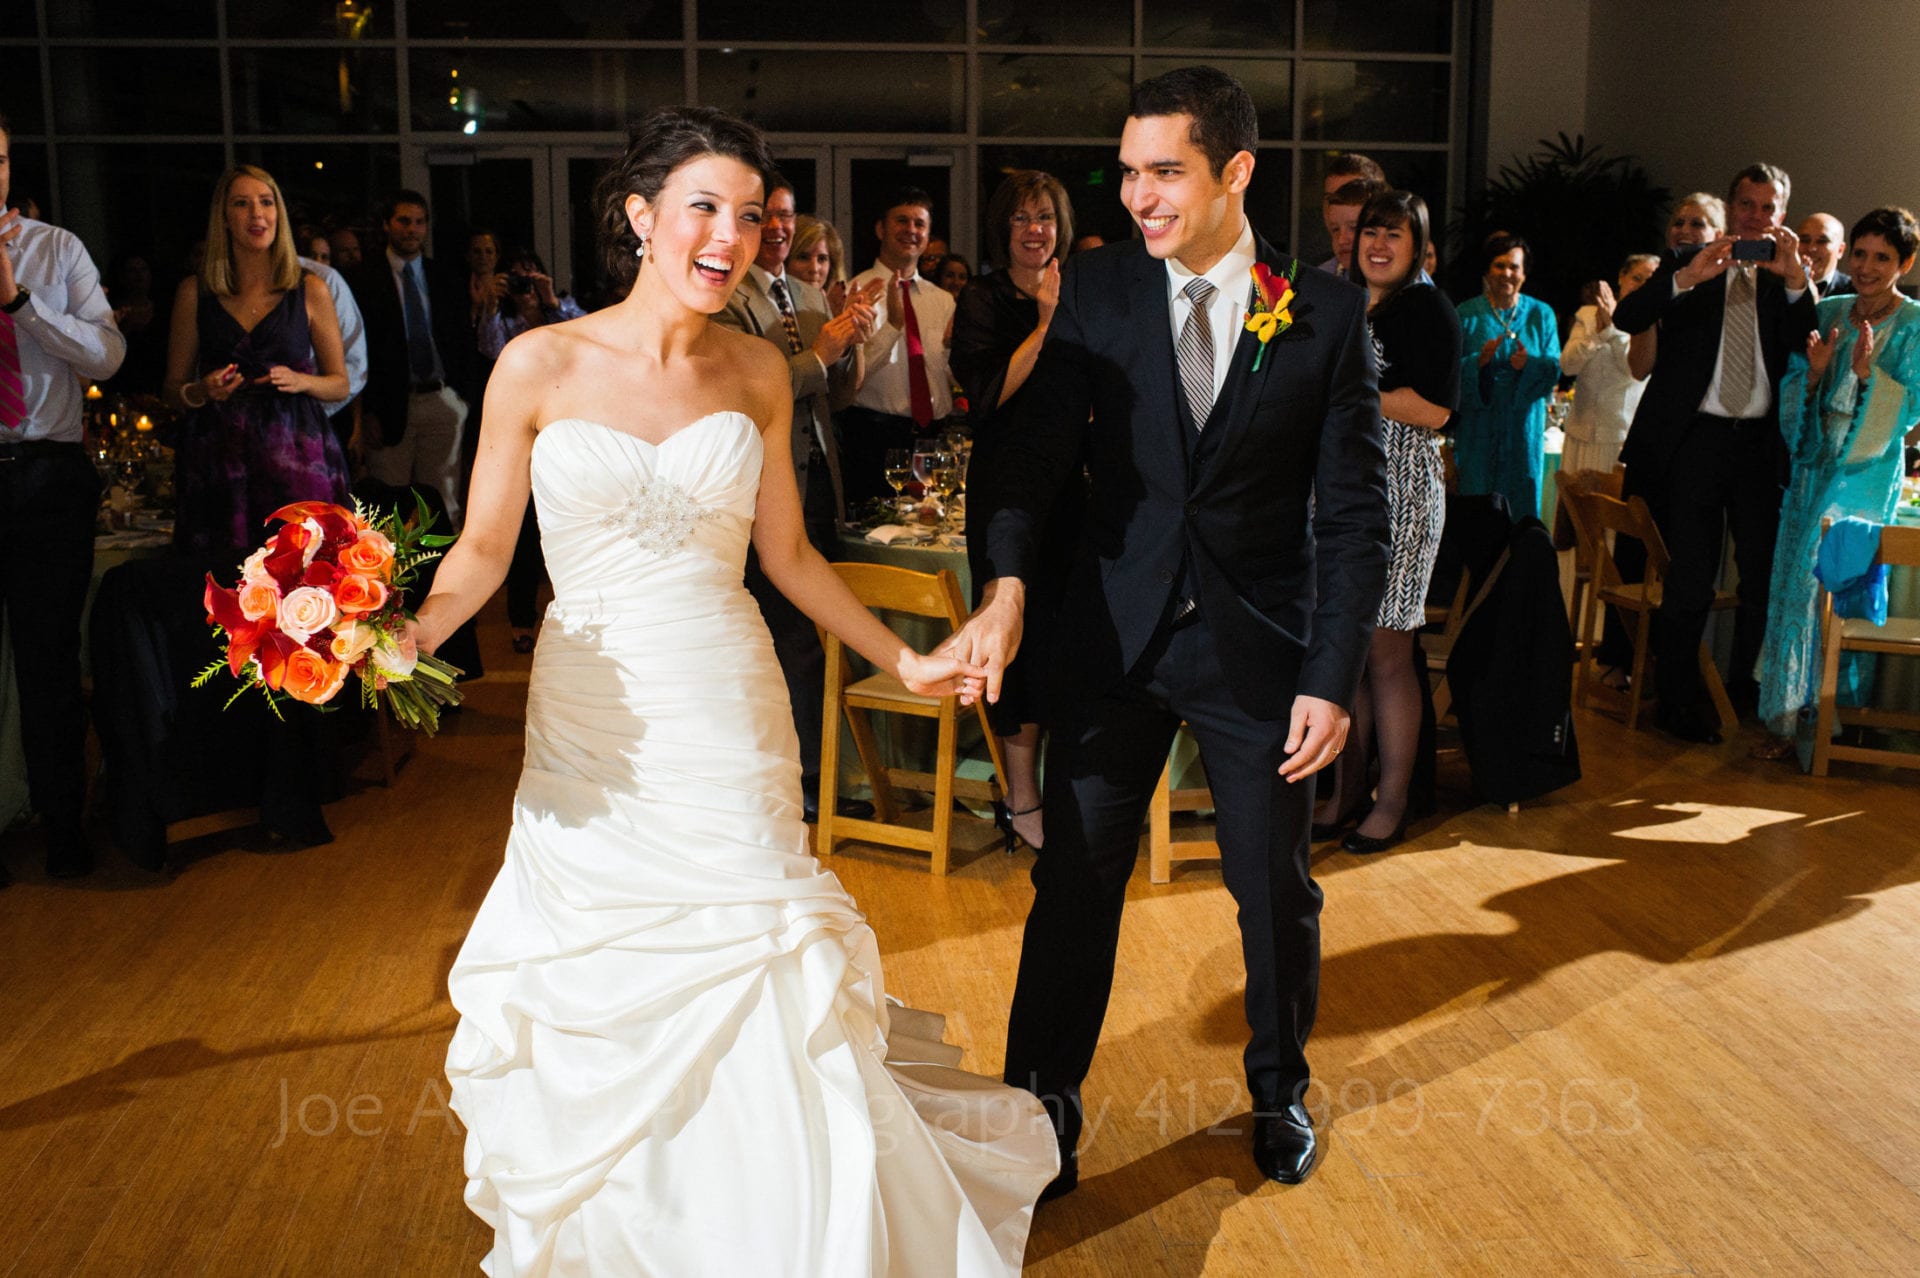 guests smile and watch a bride with an orange and pink bouquet dance with her groom Phipps Conservatory Weddings